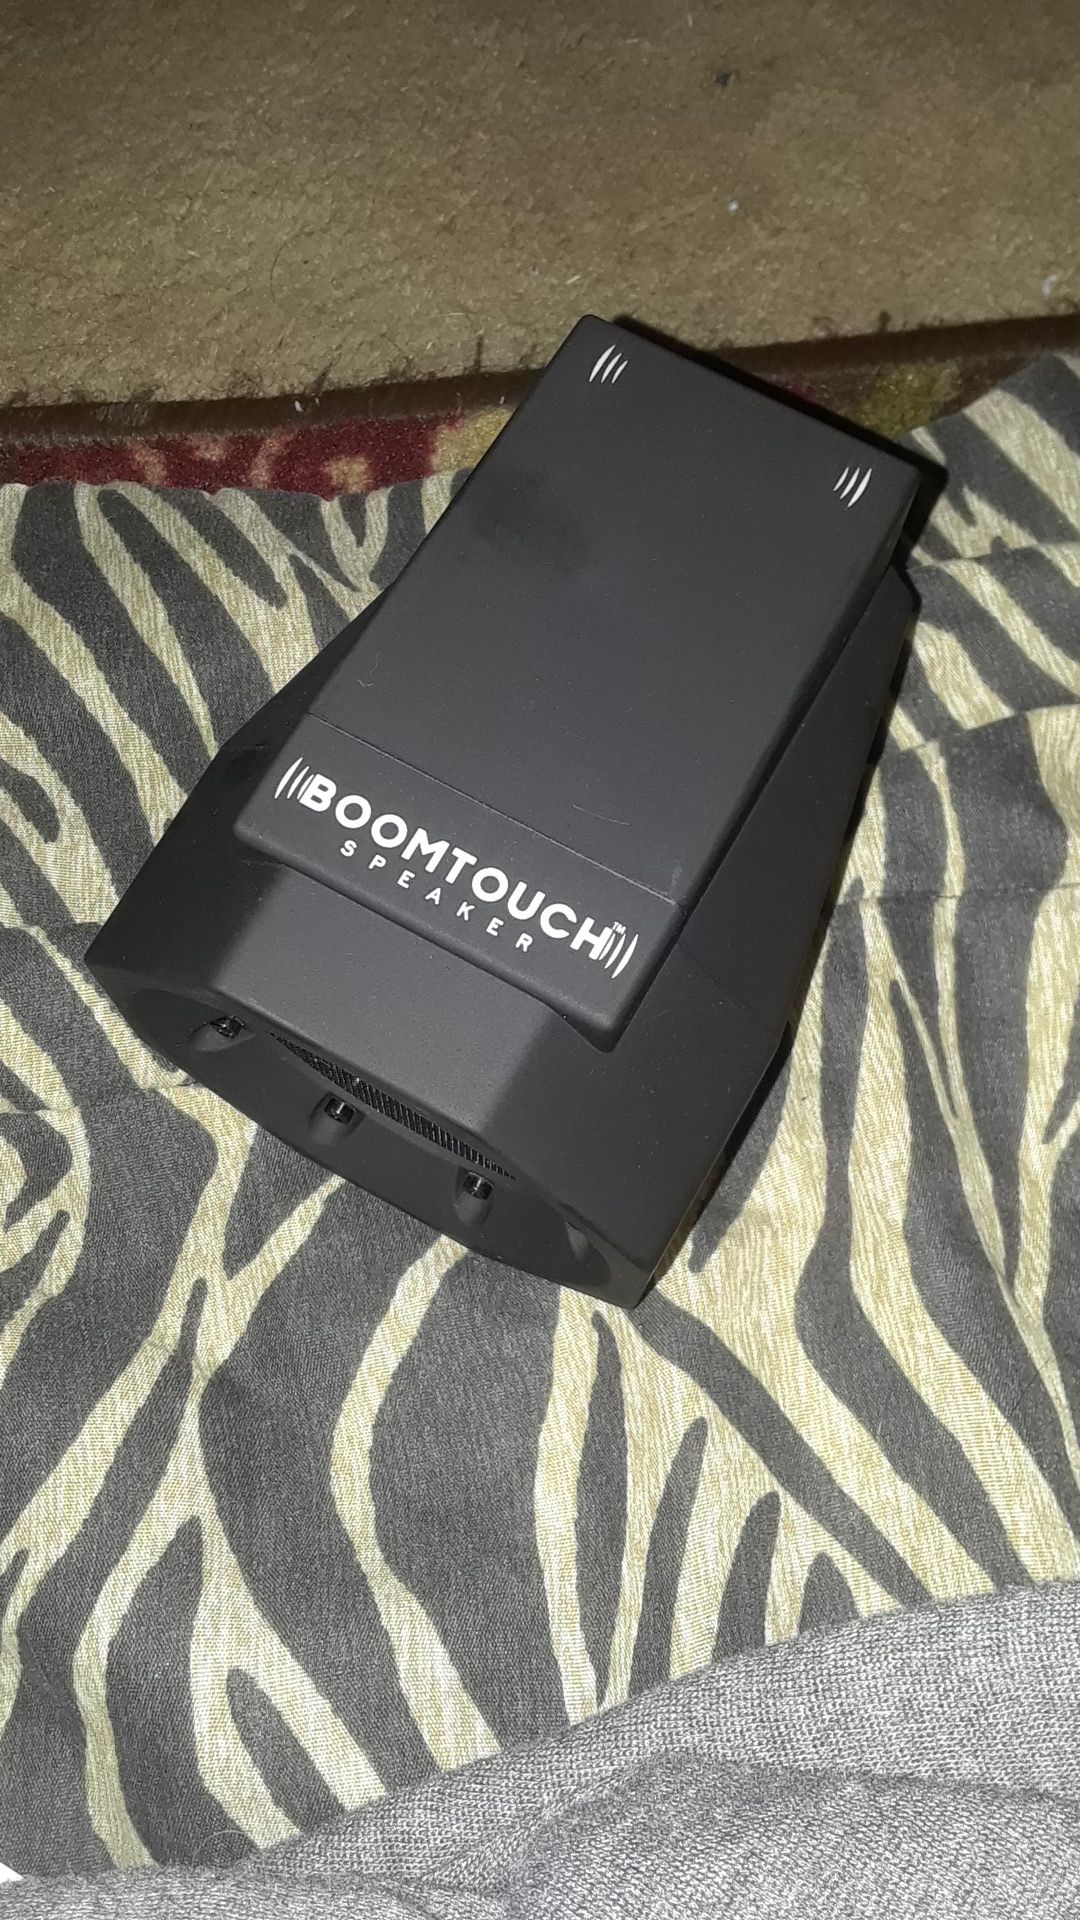 Boomtouch speakers